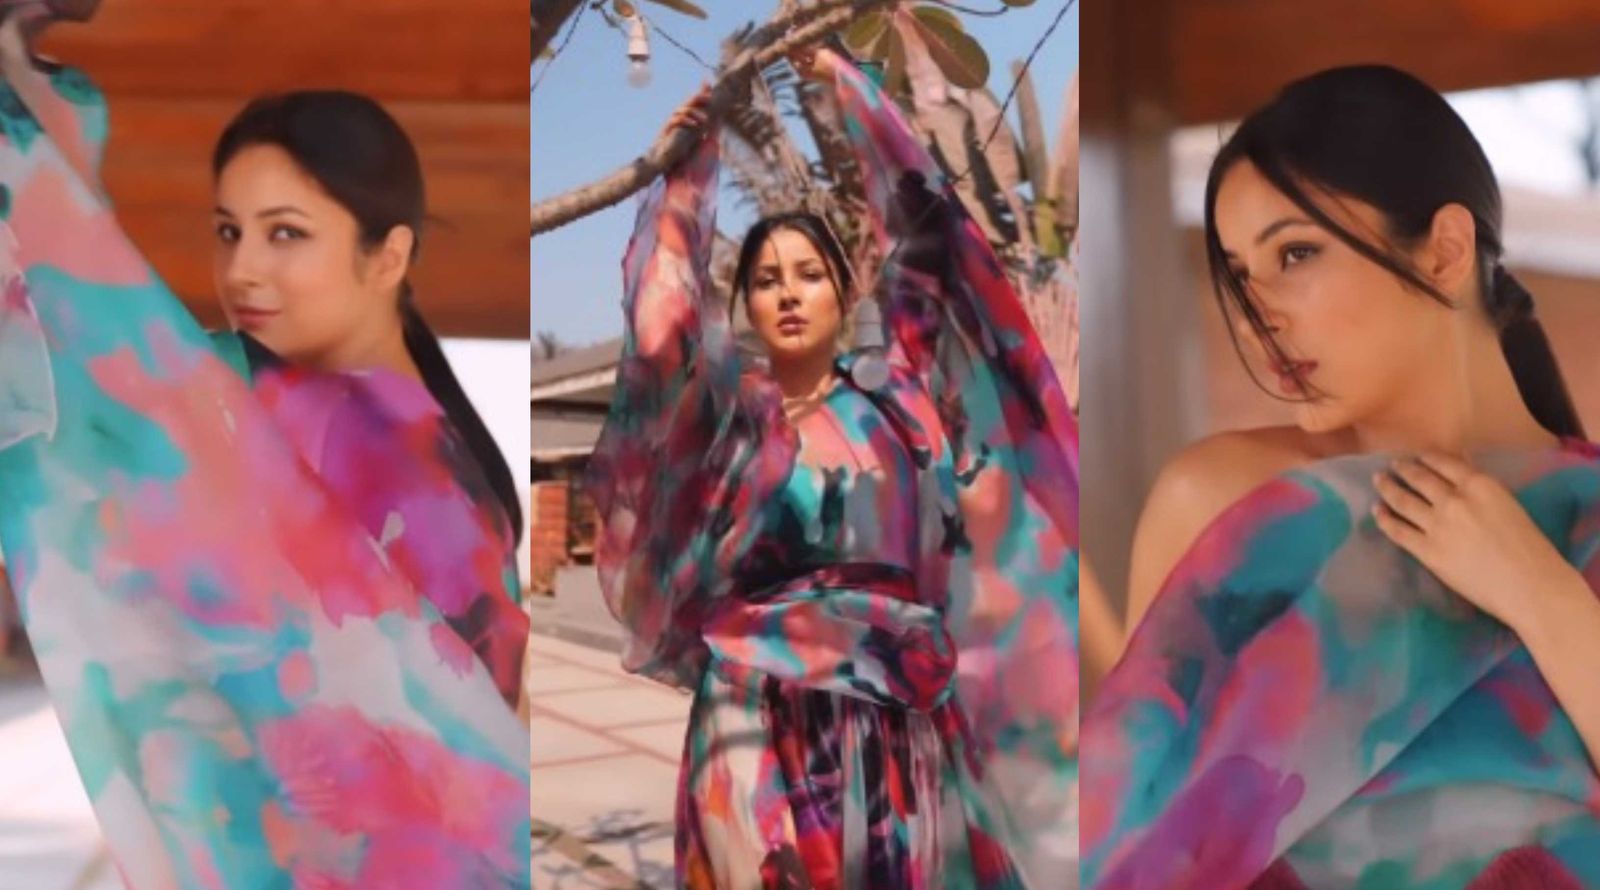 Shehnaaz Gill grooves to Badshah’s track Fly during a photoshoot; fans compare her to a butterfly